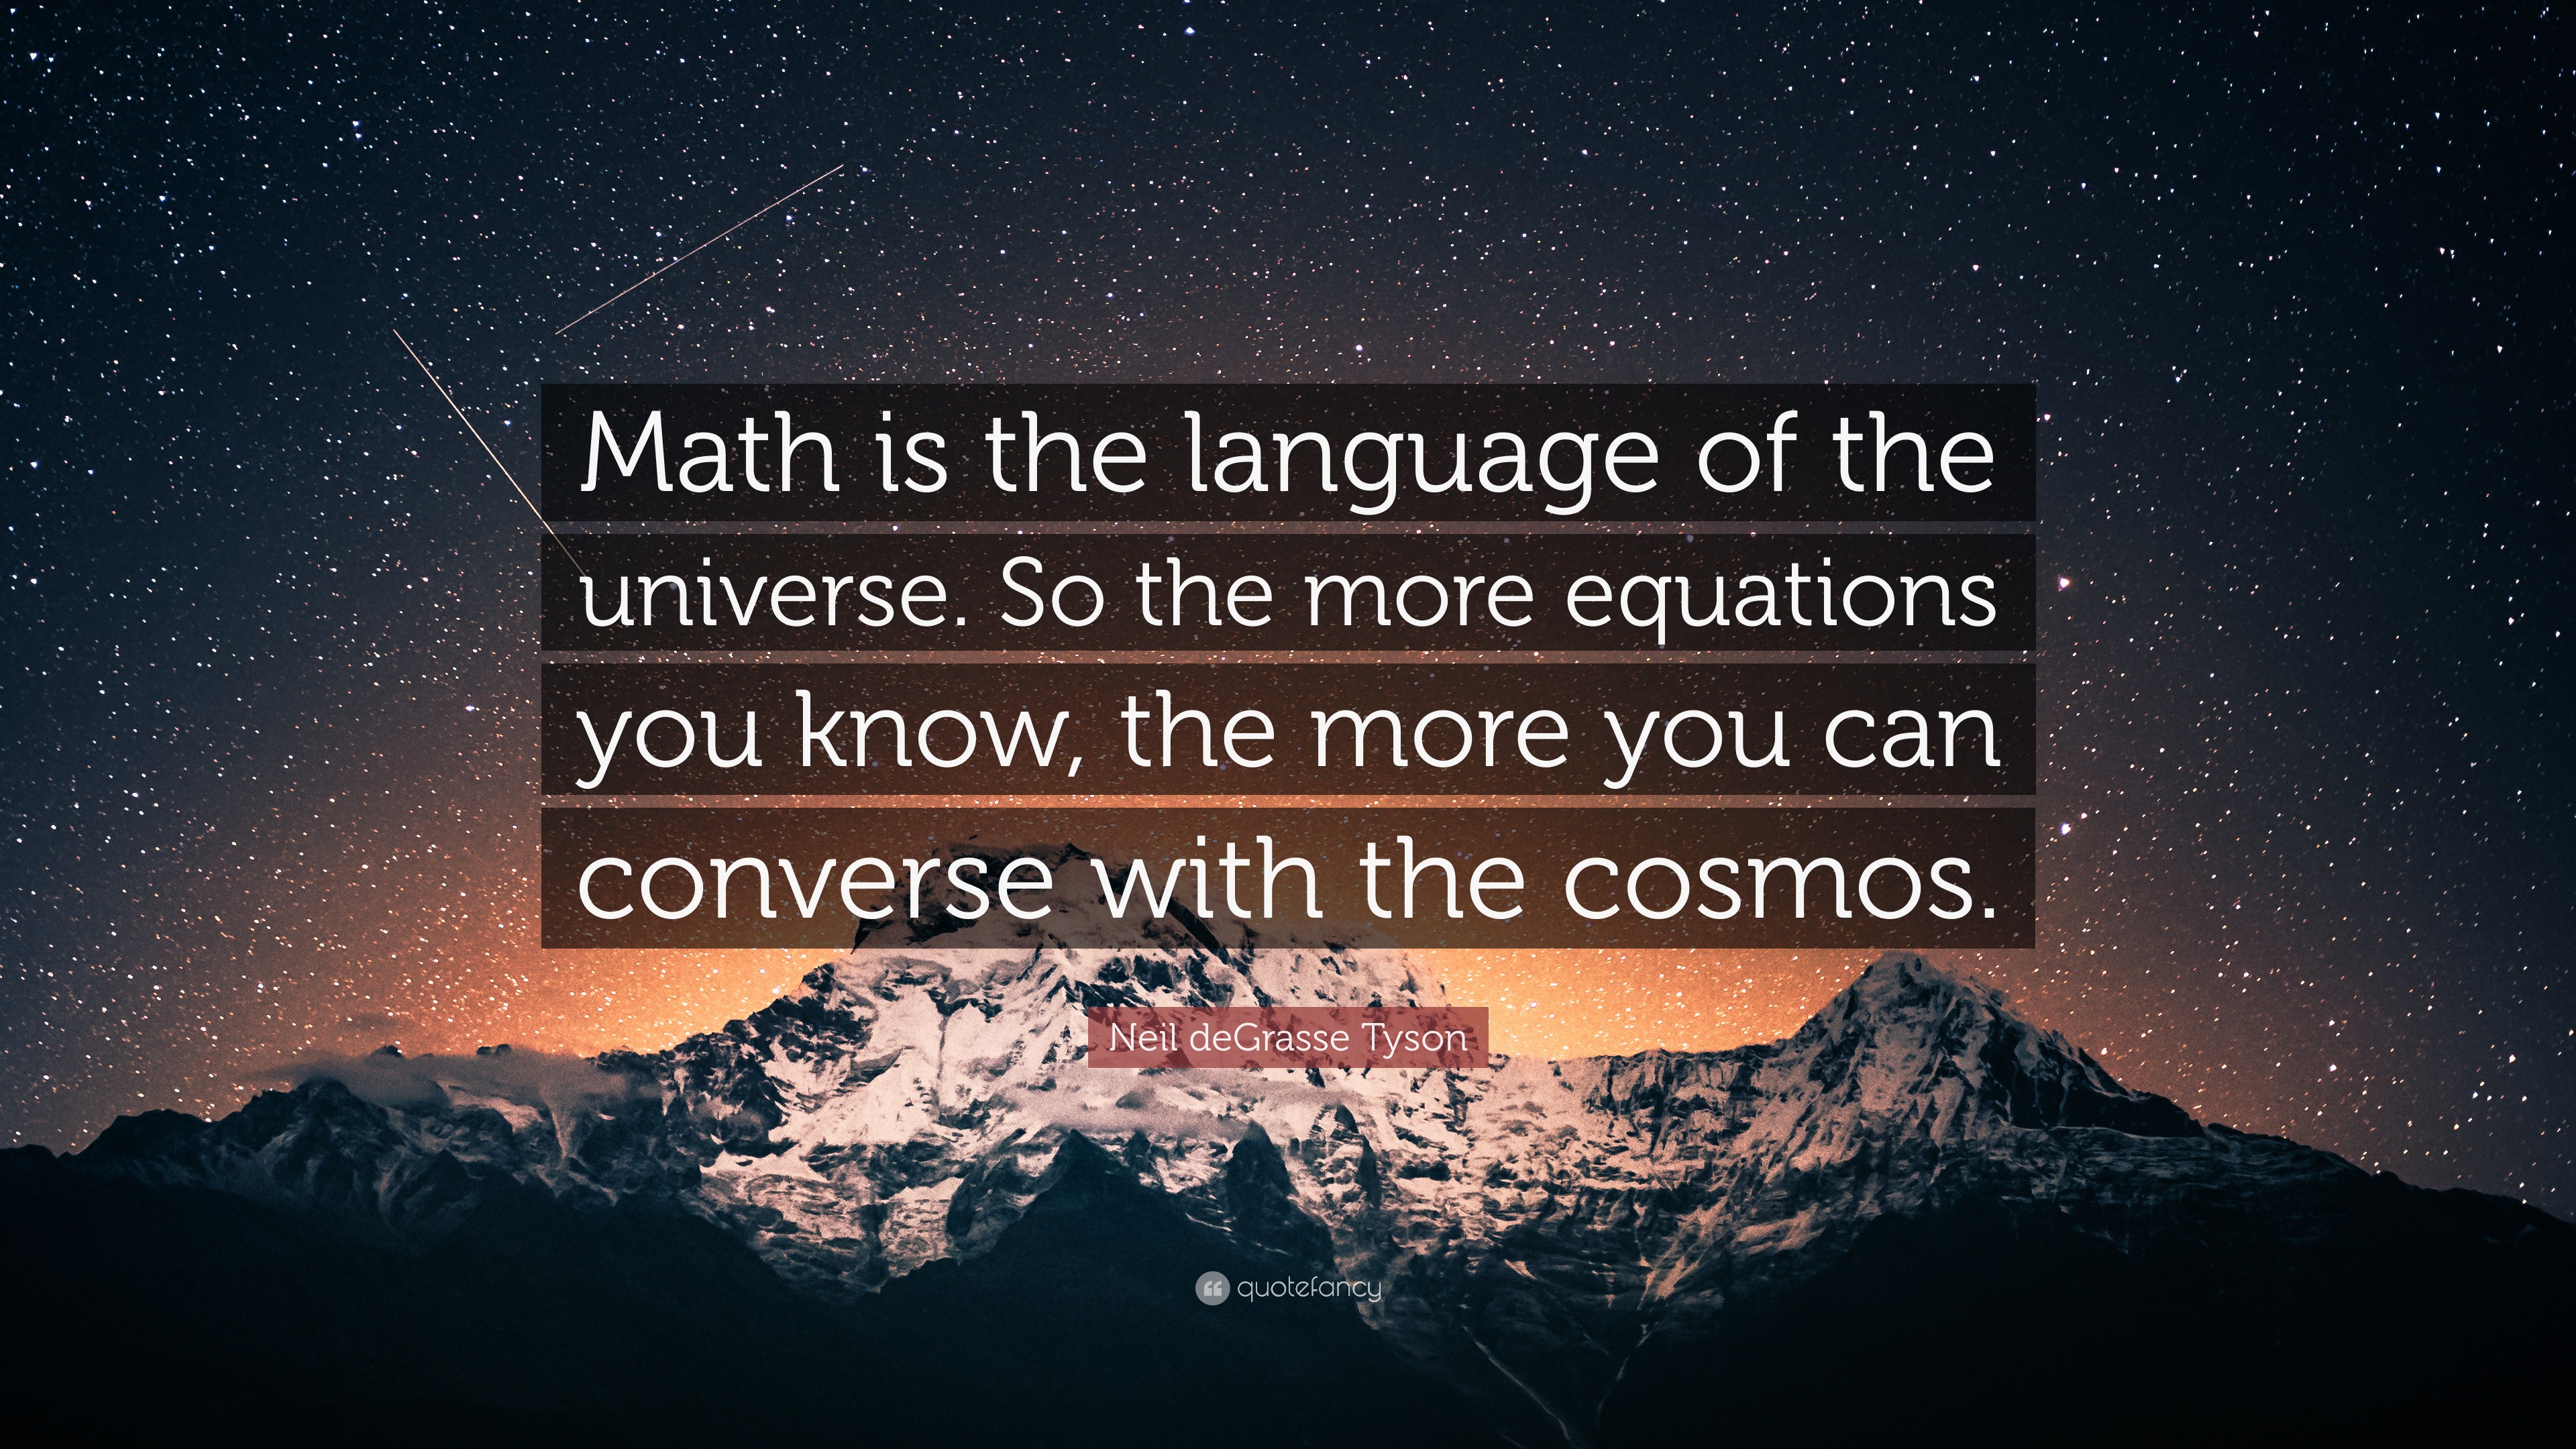 Math Quotes (40 wallpapers) - Quotefancy